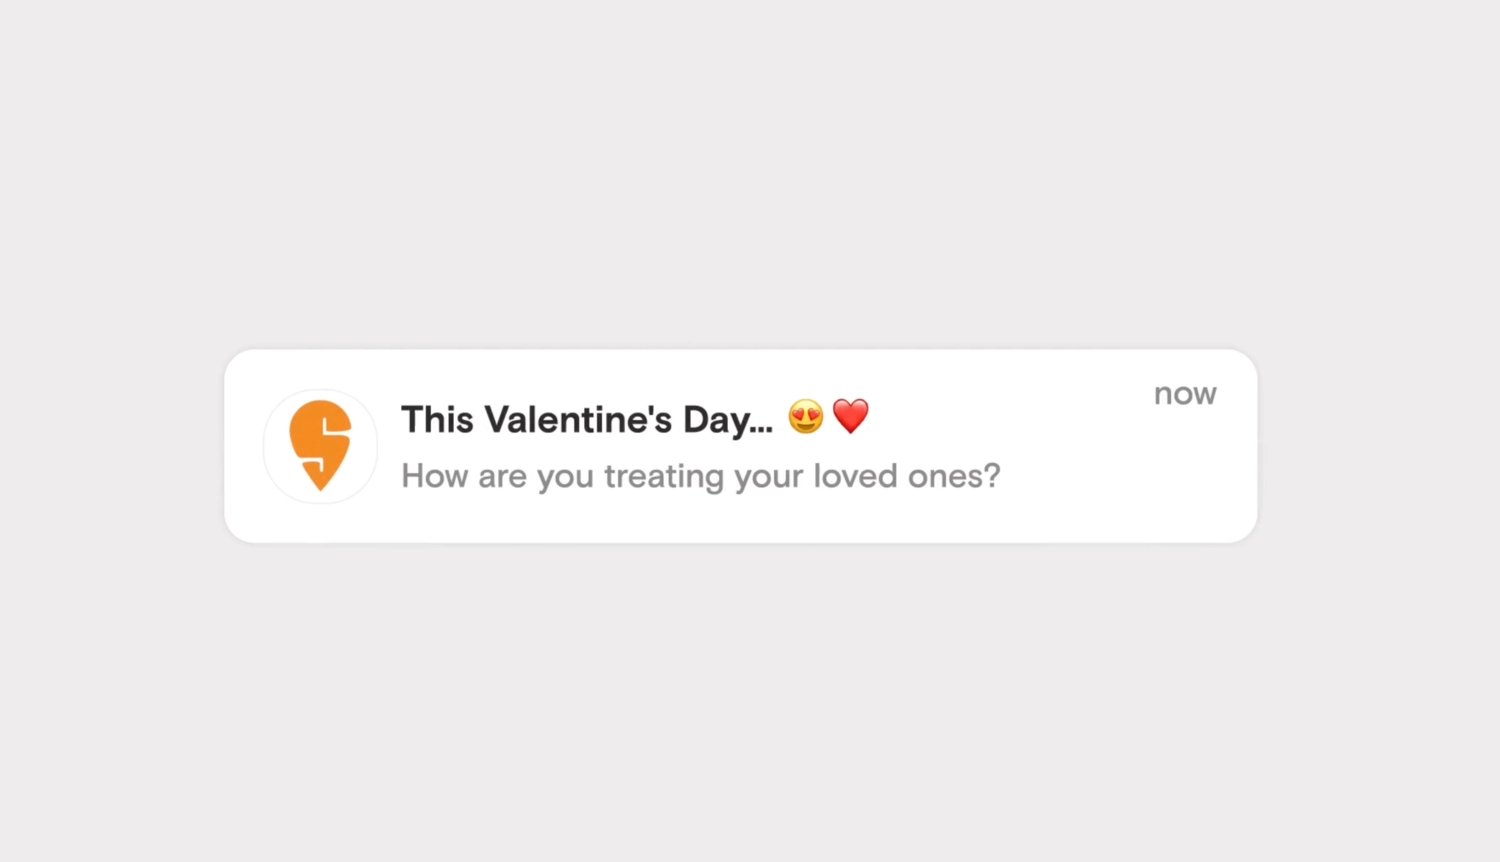 Swiggy, Table for 2, Valentine's Day Campaign, Campaigns of the world